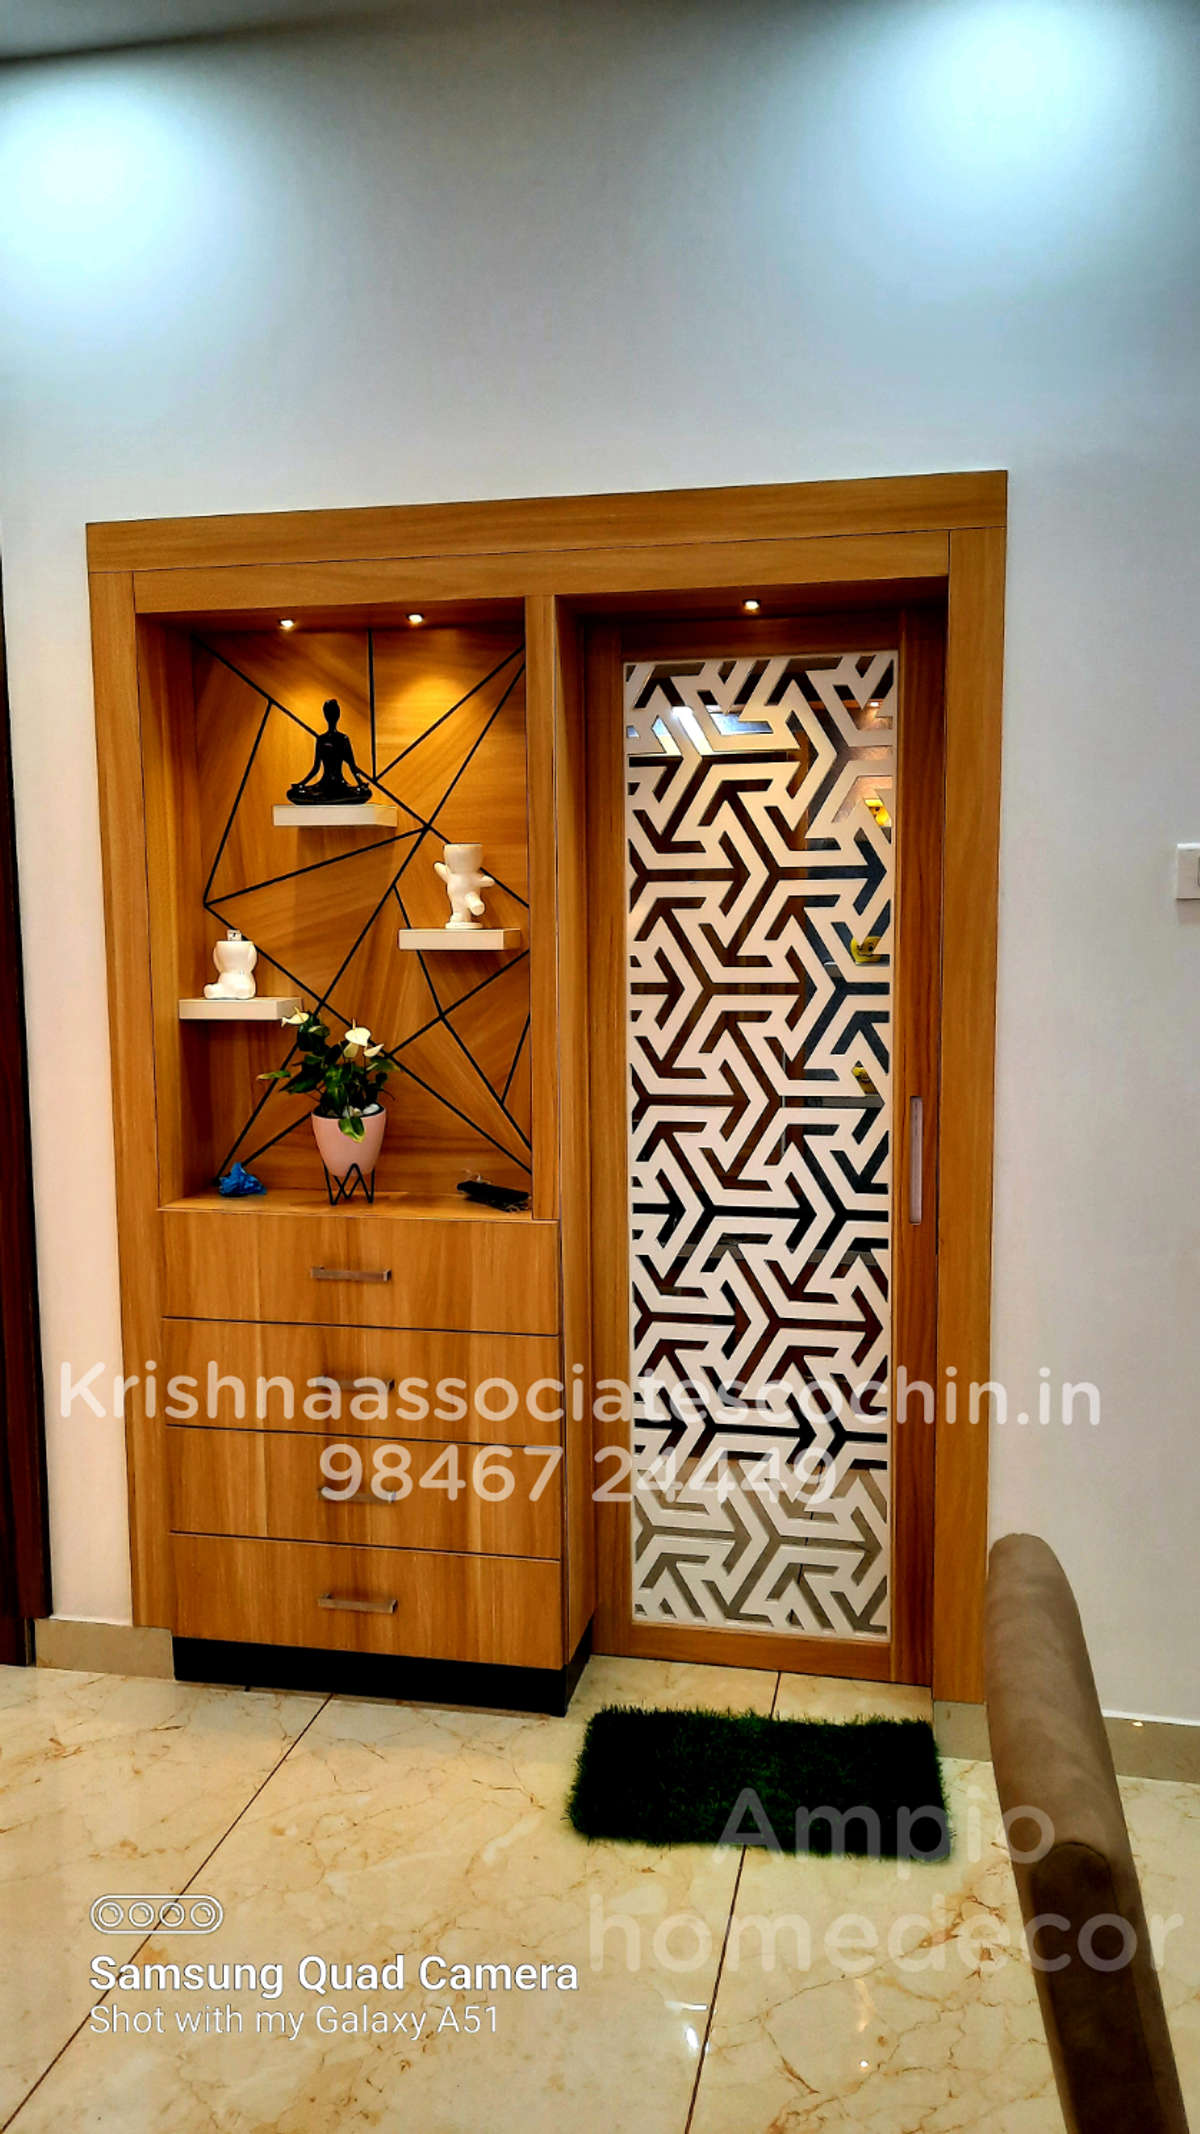 What makes a truly great interior design project? I’d say, when everything runs smoothly ranks right up there! But that never happens, so…it’s got to be when the end result = an ecstatically happy client.

A project completed @kayamkulam for Mr & Mrs praveen

For more details https://wa.me/919846724449

#interiordesign #design #interior #homedecor #architecture #home #decor #interiors #homedesign #art #interiordesigner #furniture #decoration #luxury #designer #interiorstyling #interiordecor #homesweethome #inspiration #handmade #furnituredesign #livingroom #interiordecorating #style #kitchendesign